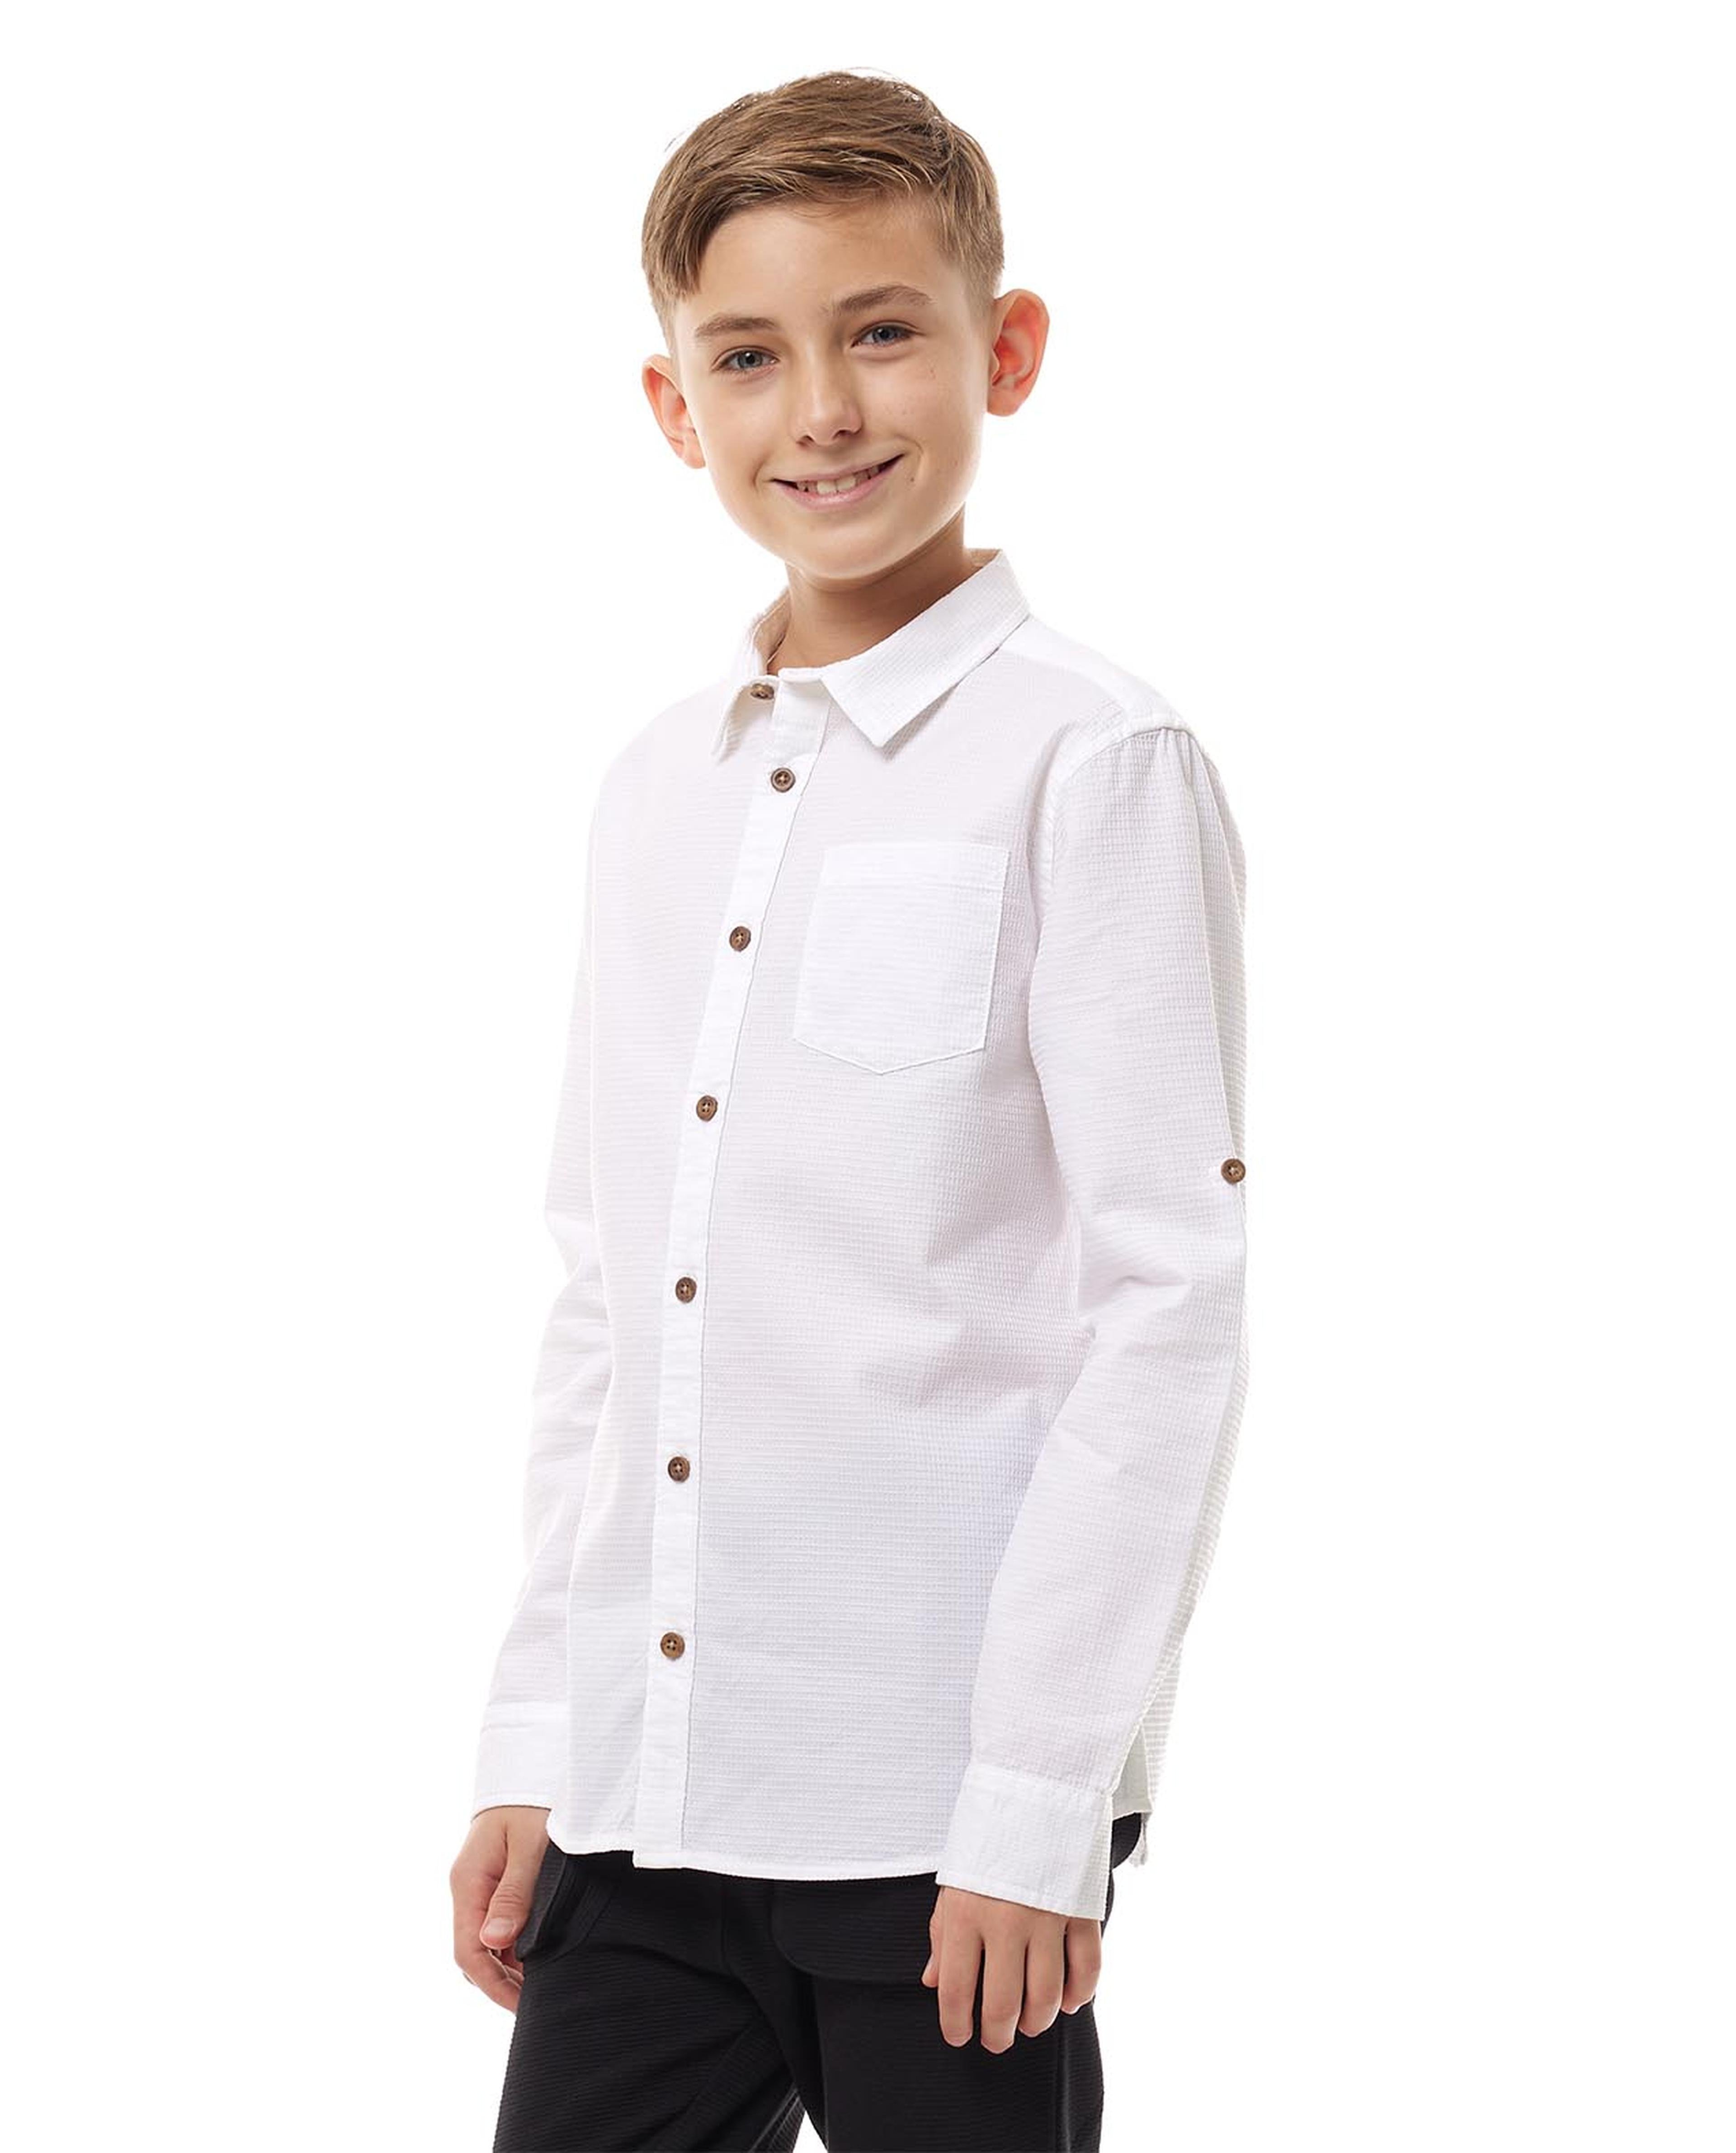 Self Patterned Shirt with Classic Collar and Long Sleeves